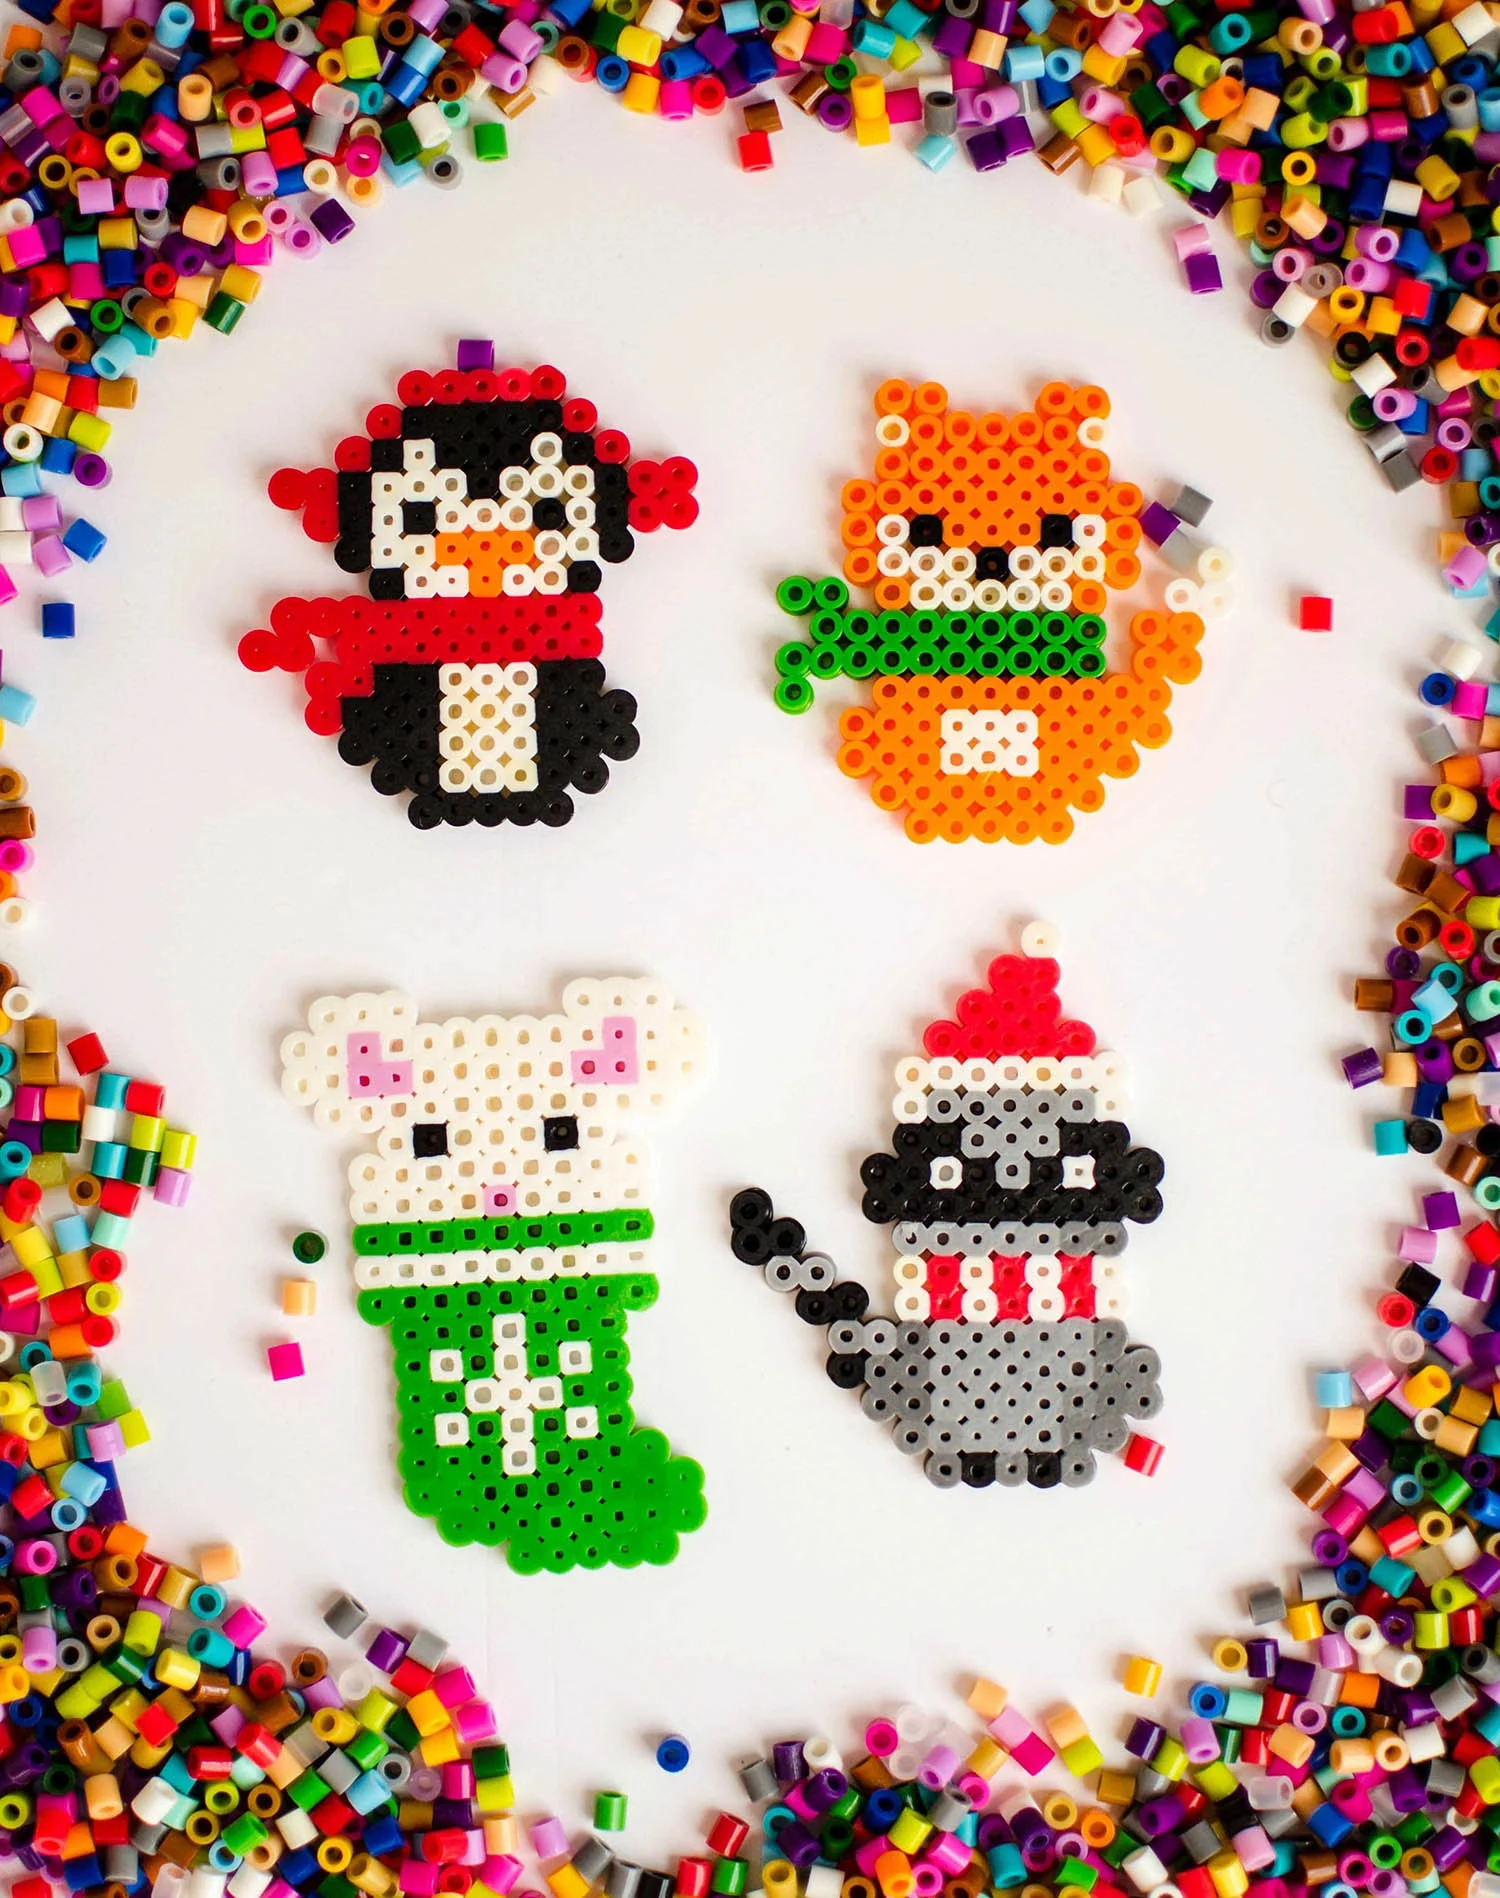 Make these adorable melty bead Christmas ornaments with the free printable patterns available to download.